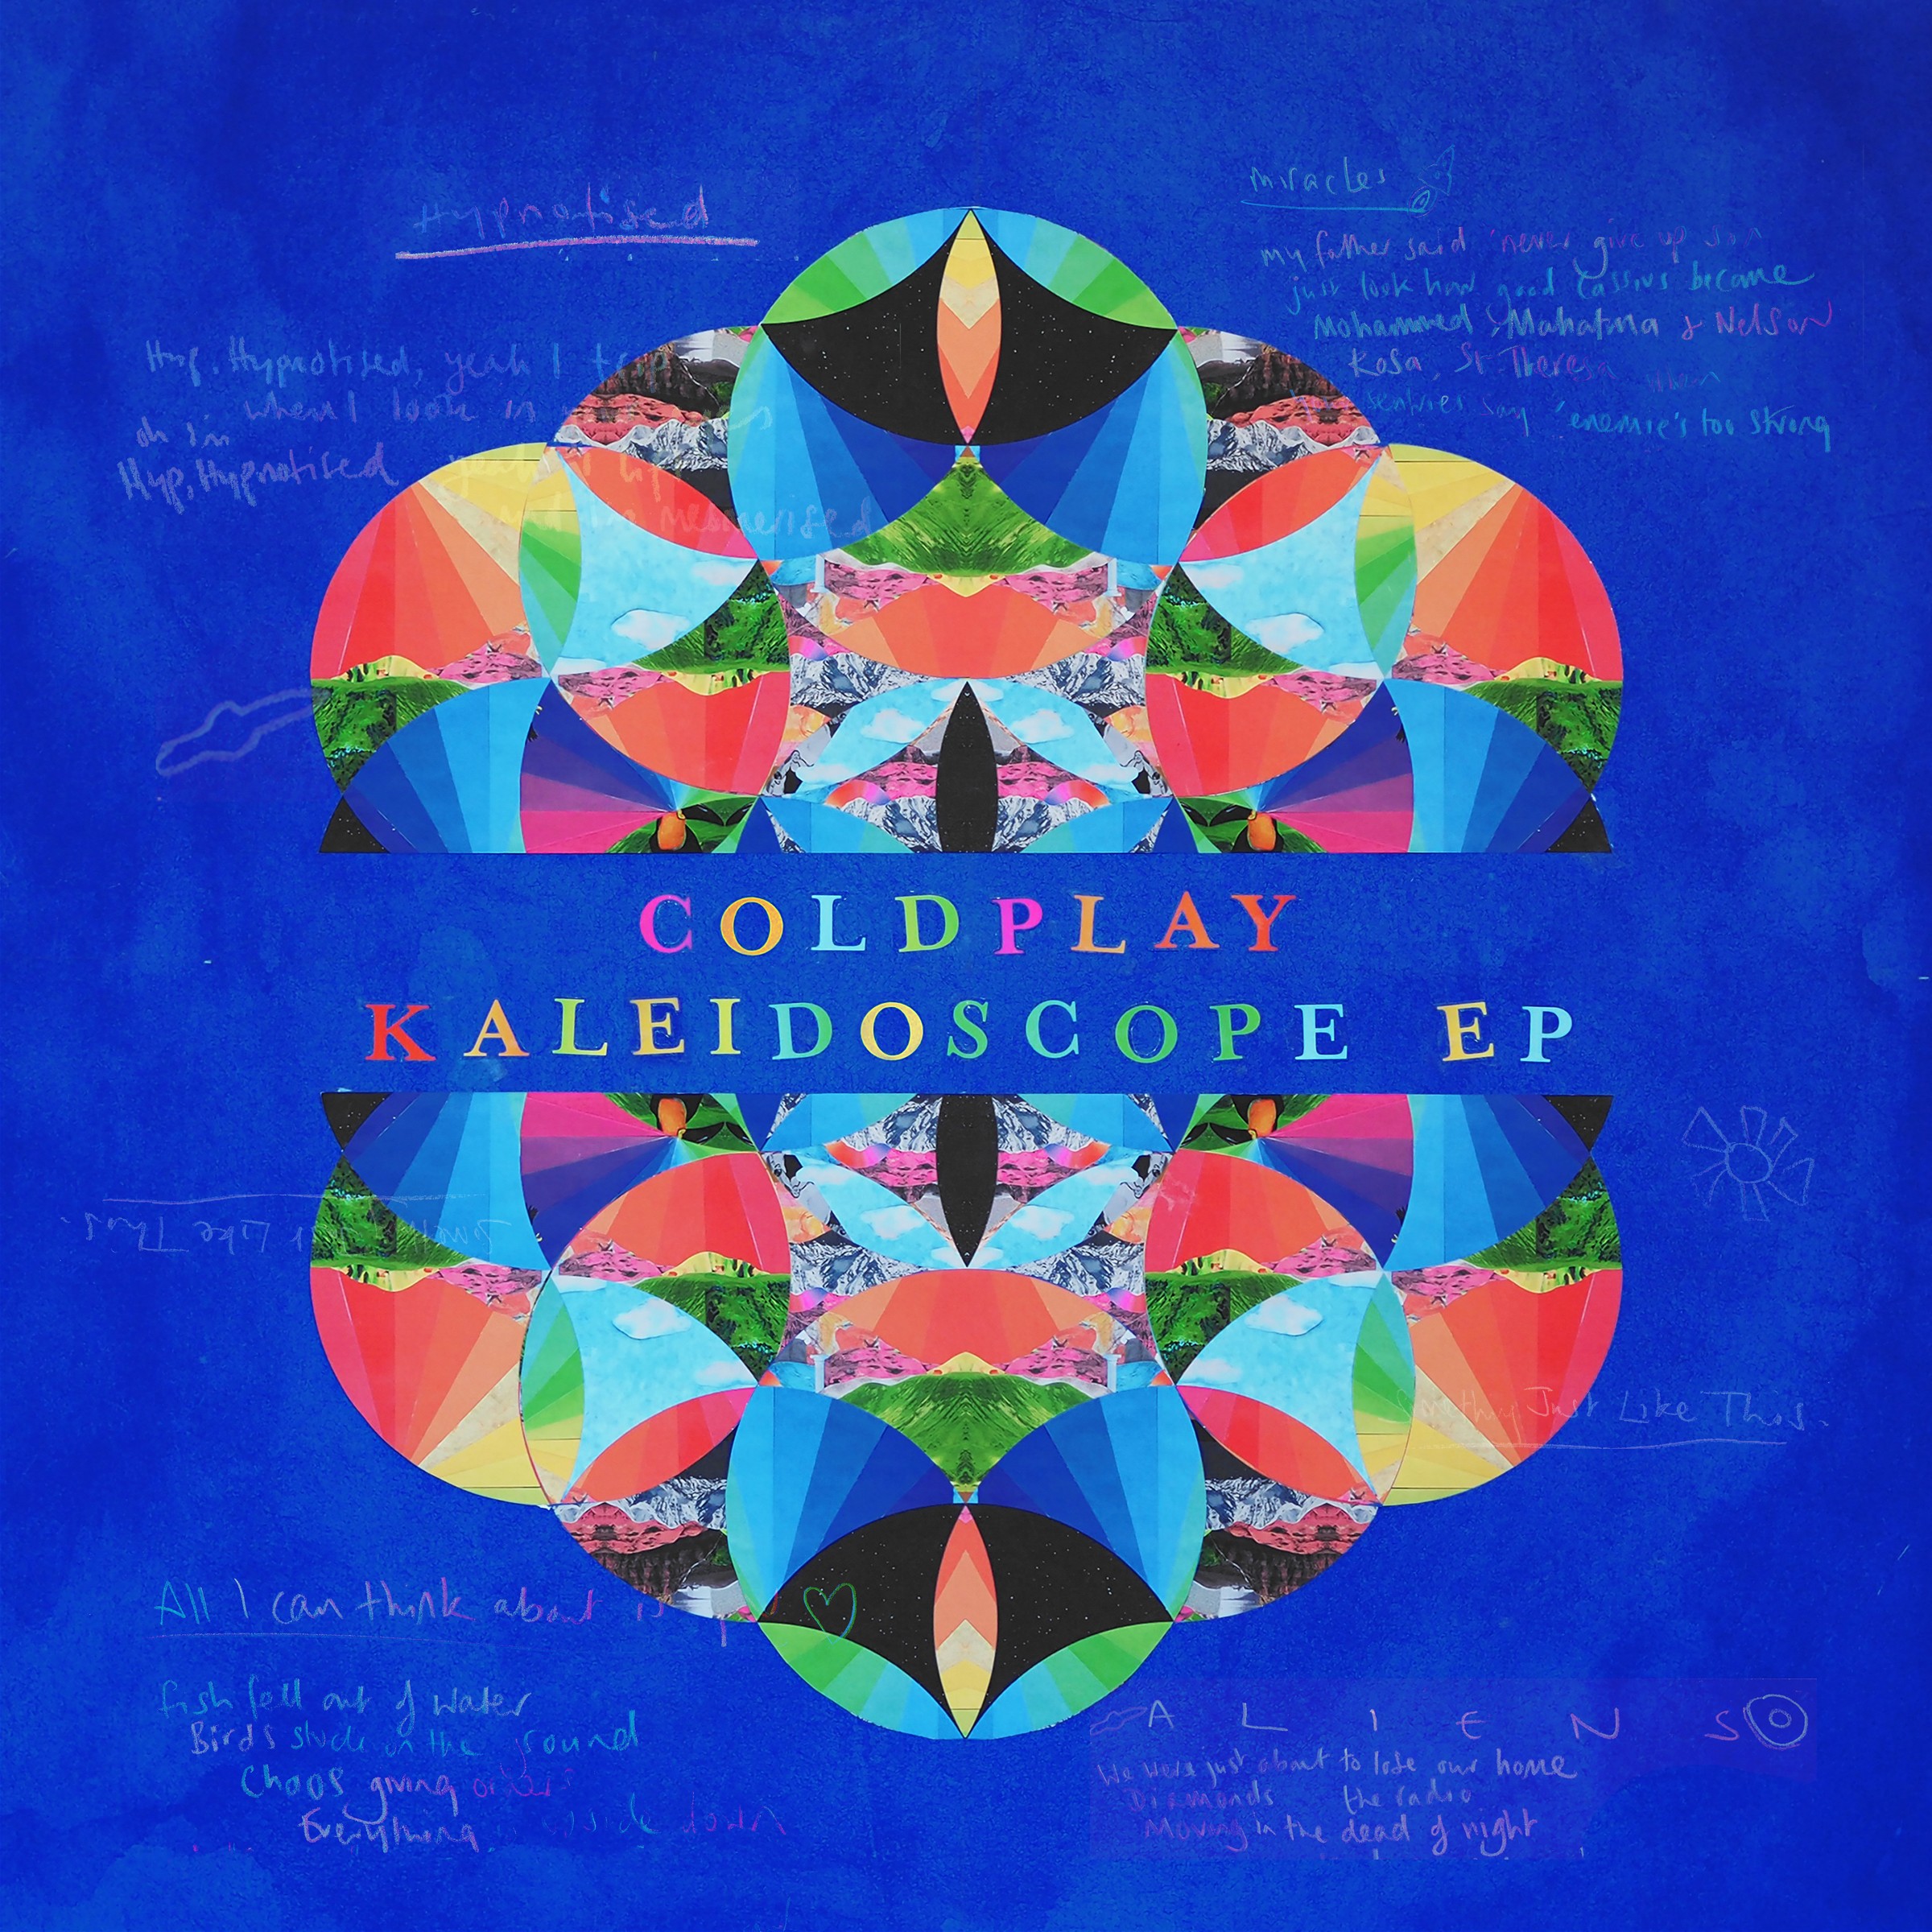 Coldplay (Kaleidoscope EP) Album Cover POSTER - Lost Posters